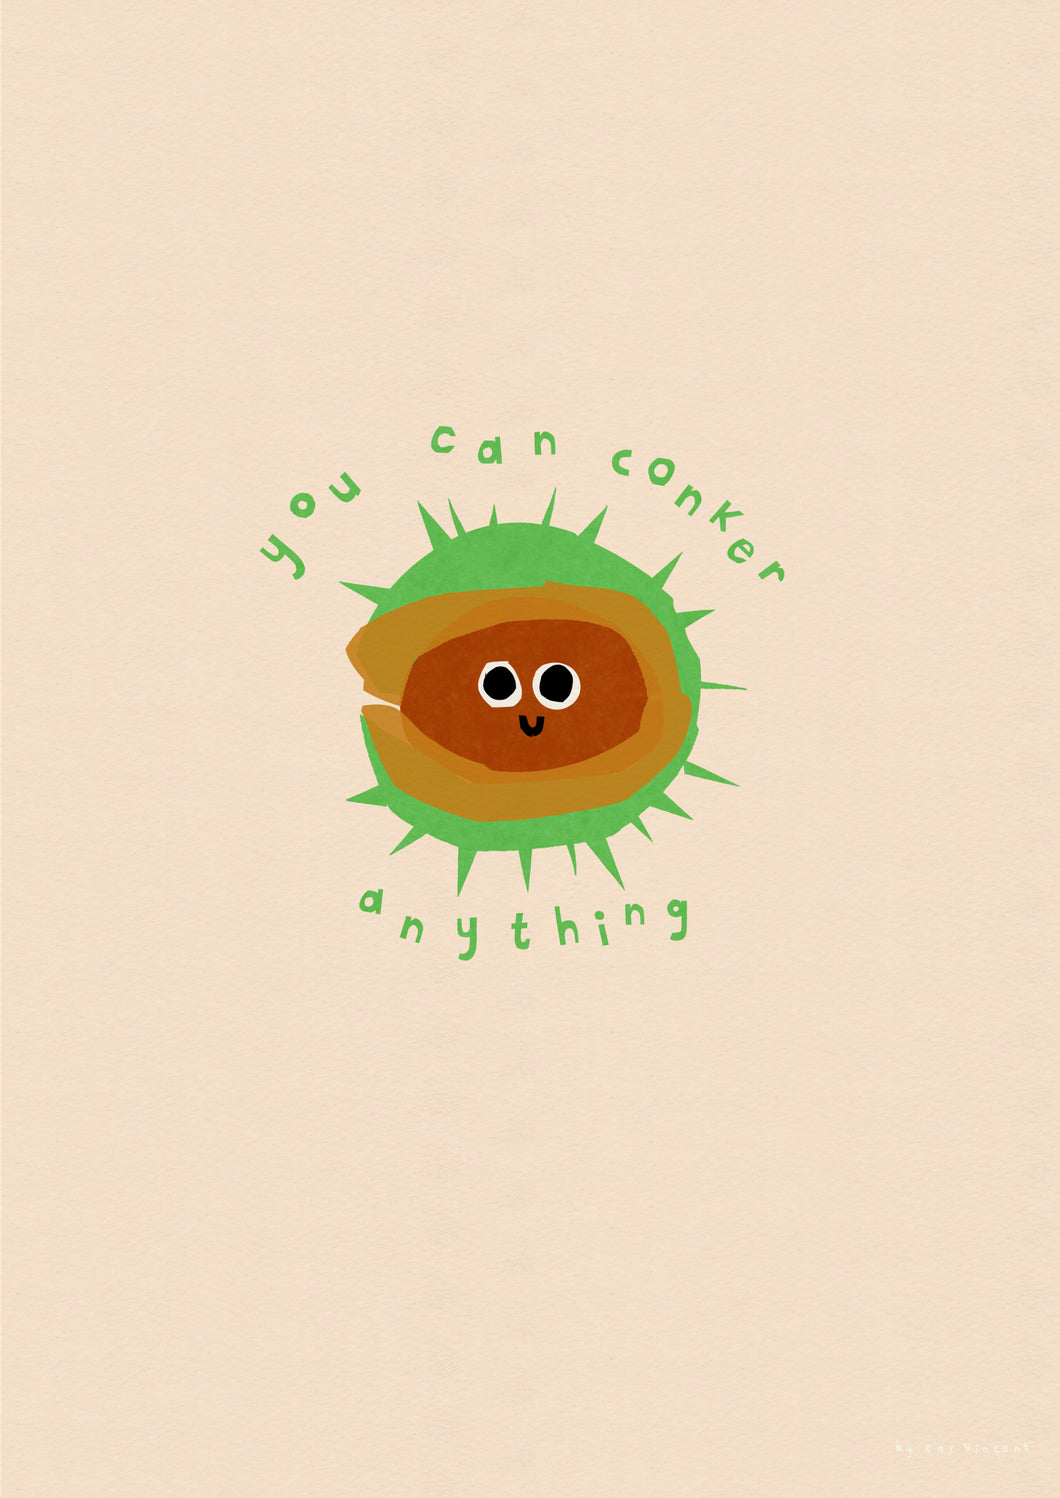 'You can conker anything' Giclee print